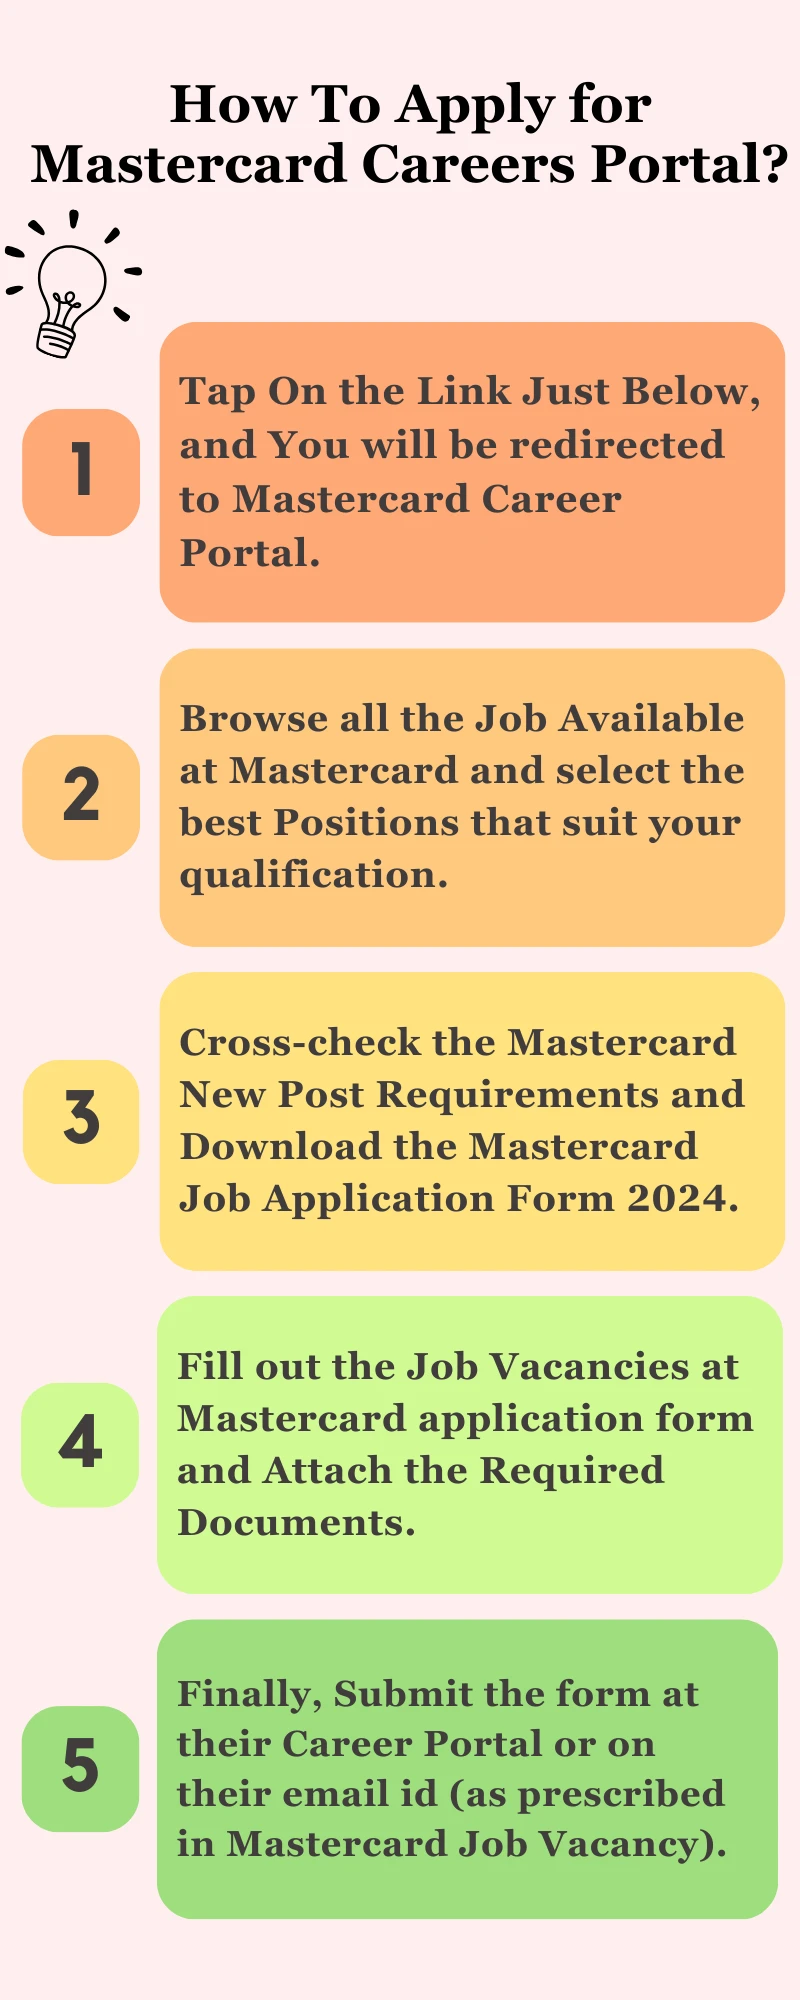 How To Apply for Mastercard Careers Portal?